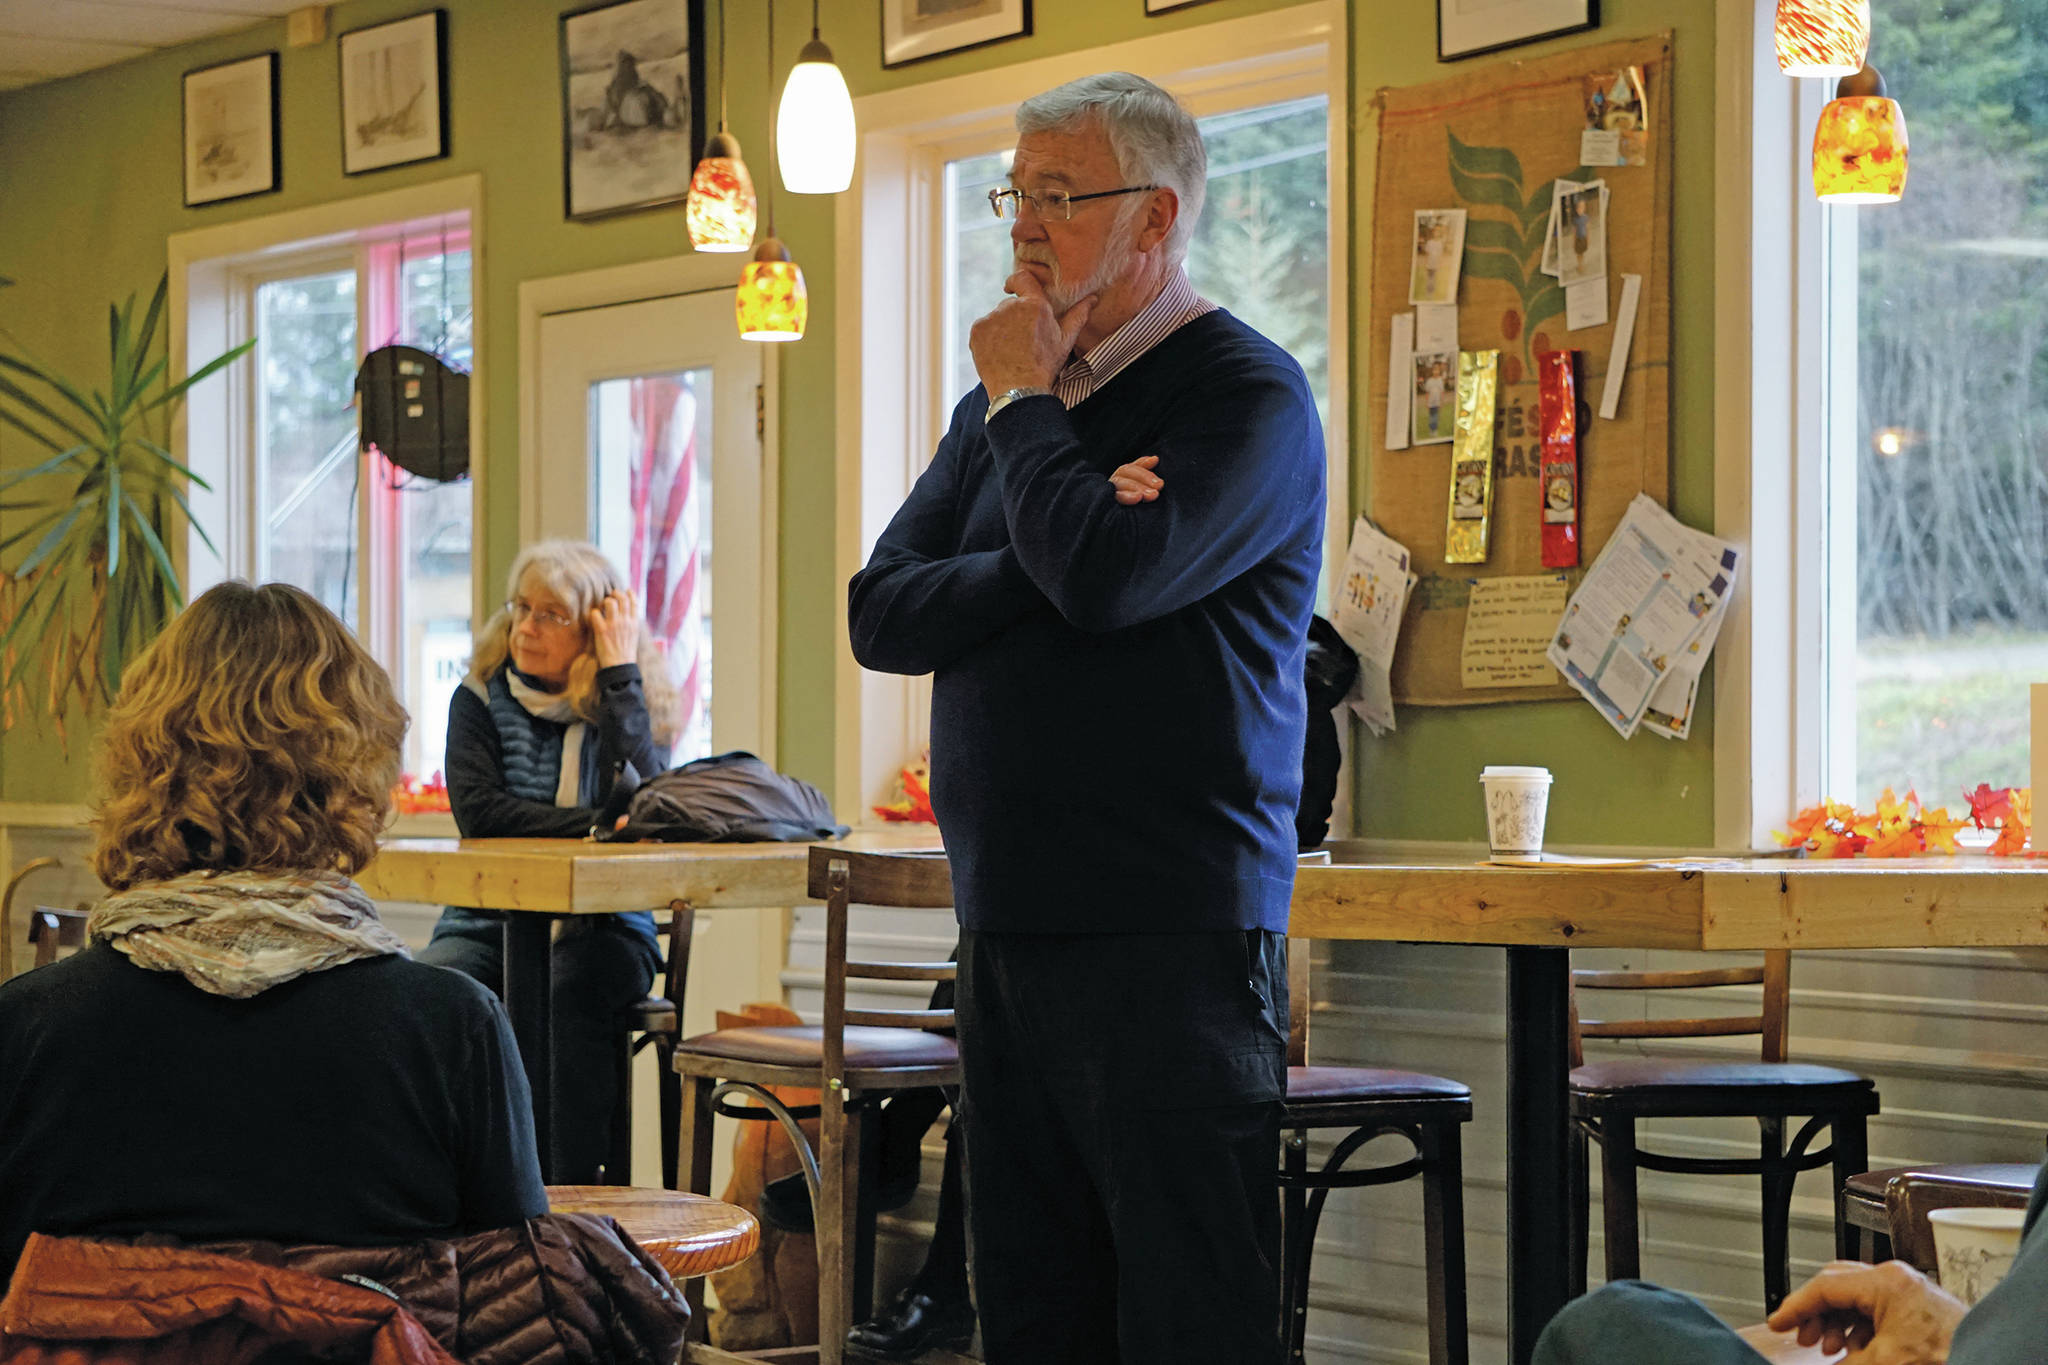 Sen. Gary Stevens, R-Kodiak, listens to a question during a town meeting on Saturday, Nov. 9, 2019, at Captain’s Coffee in Homer, Alaska. (Photo by Michael Armstrong/Homer News)